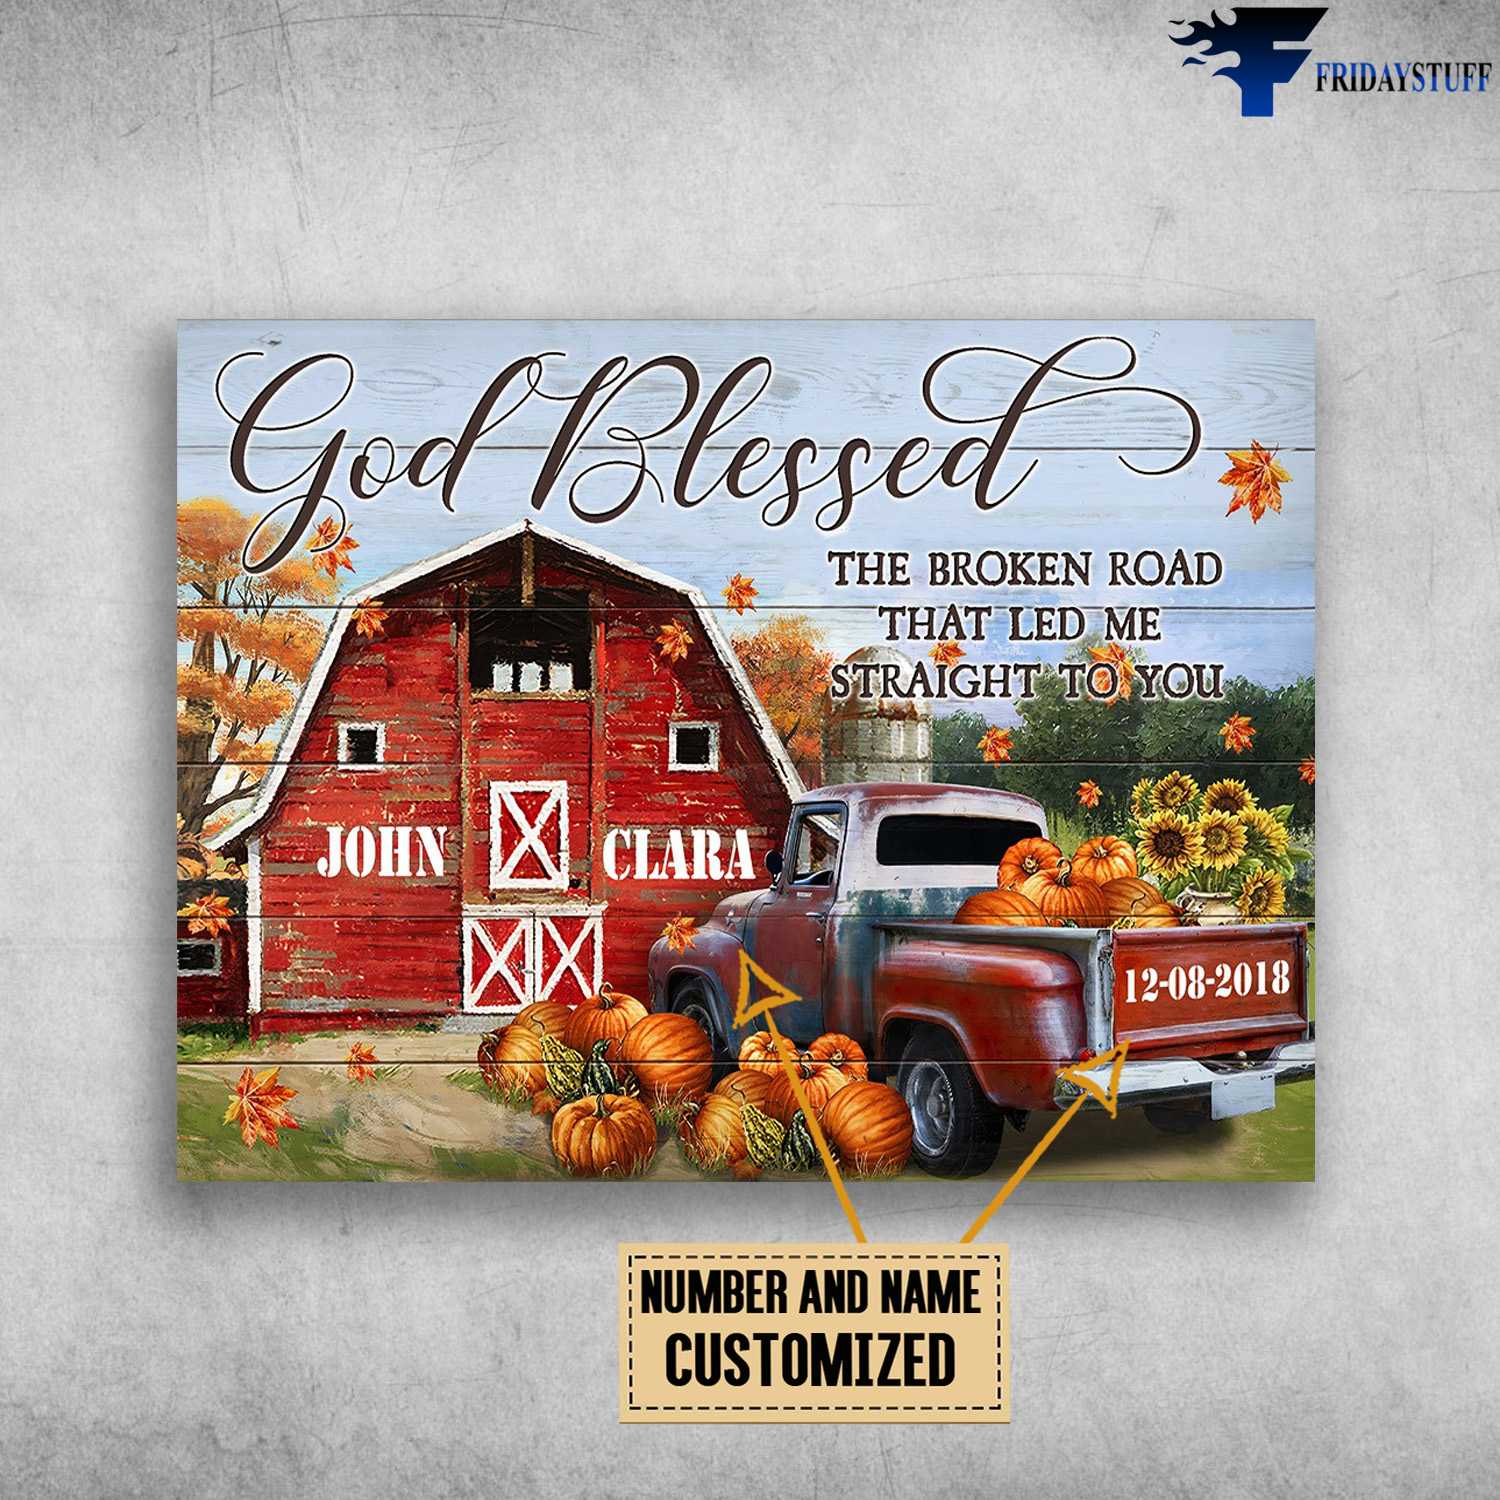 Farmer Poster, God Blessed The Broken Road, Thad Led me Straight To You